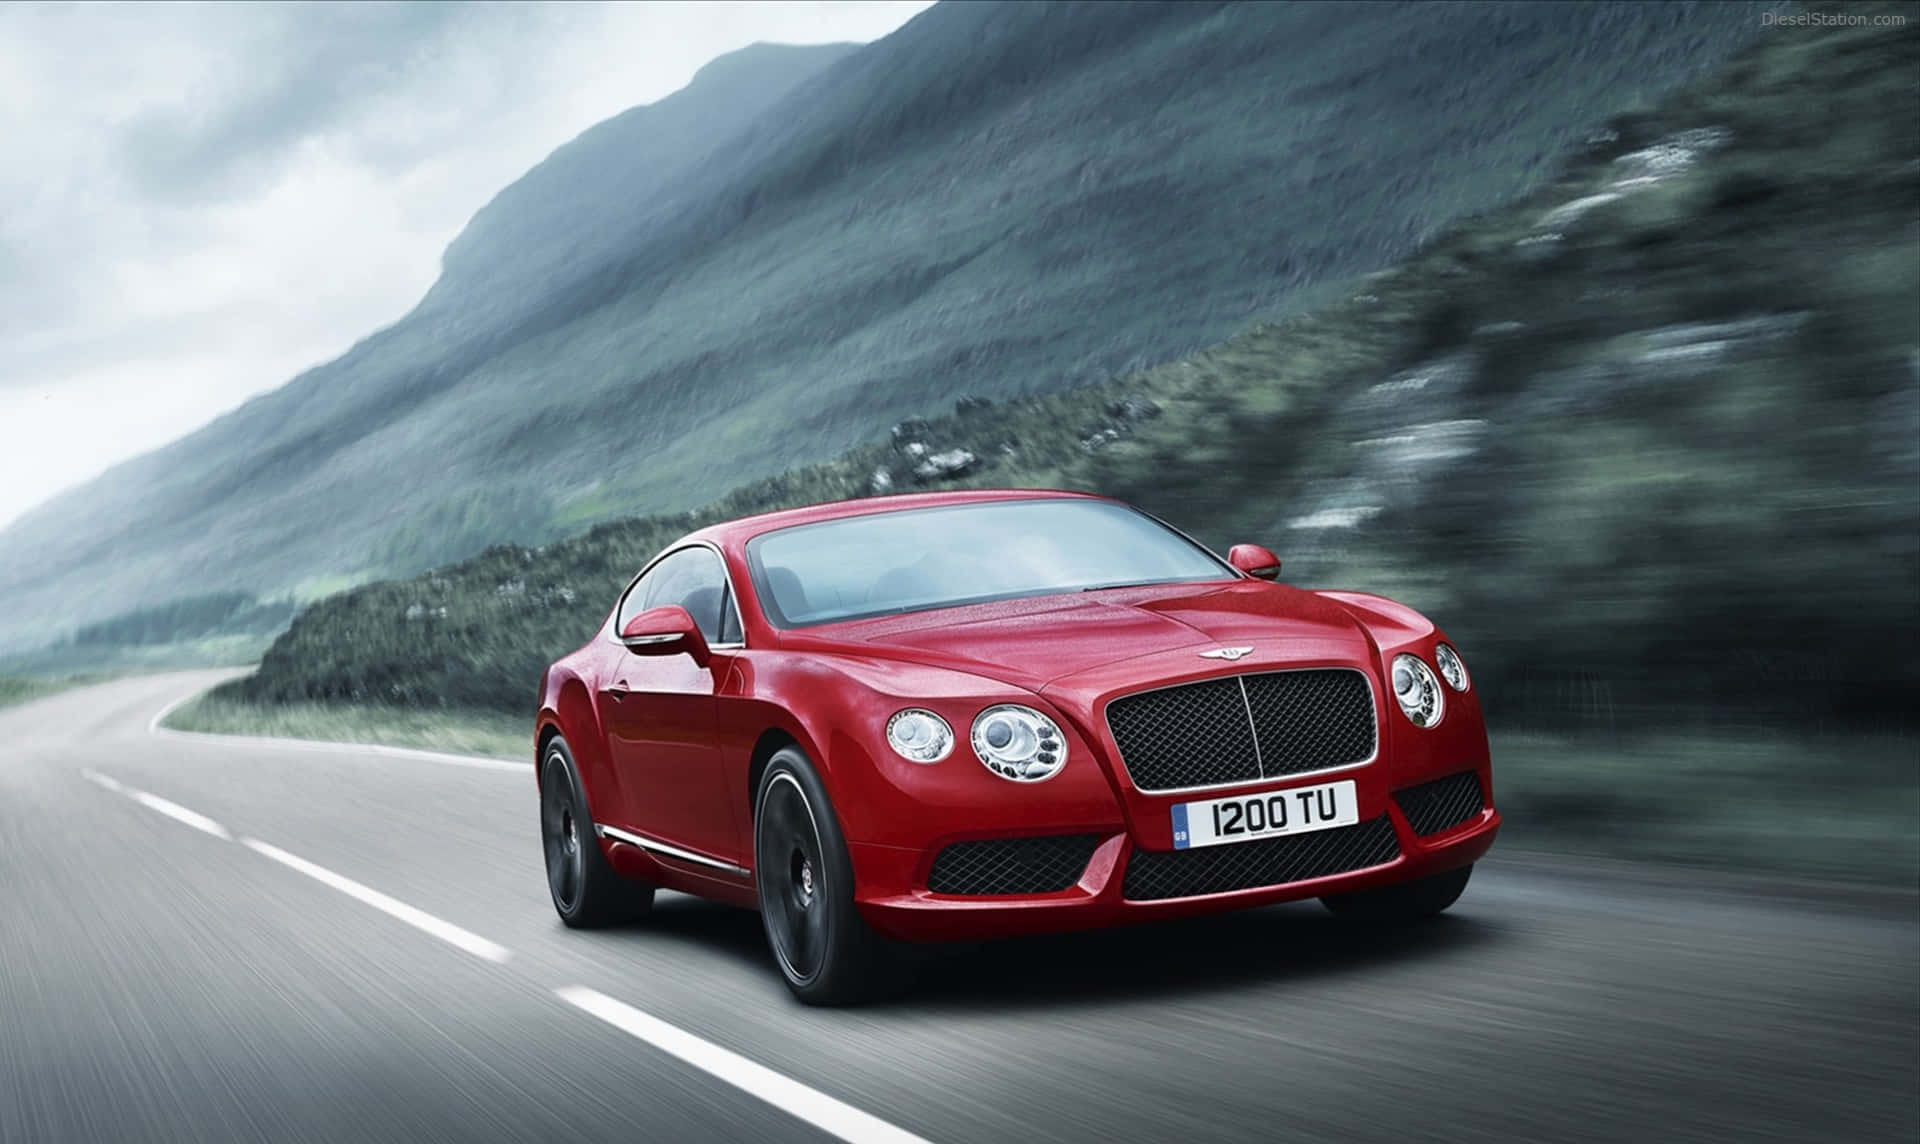 "The Bentley Continental GT: Luxury Performance at Its Finest"